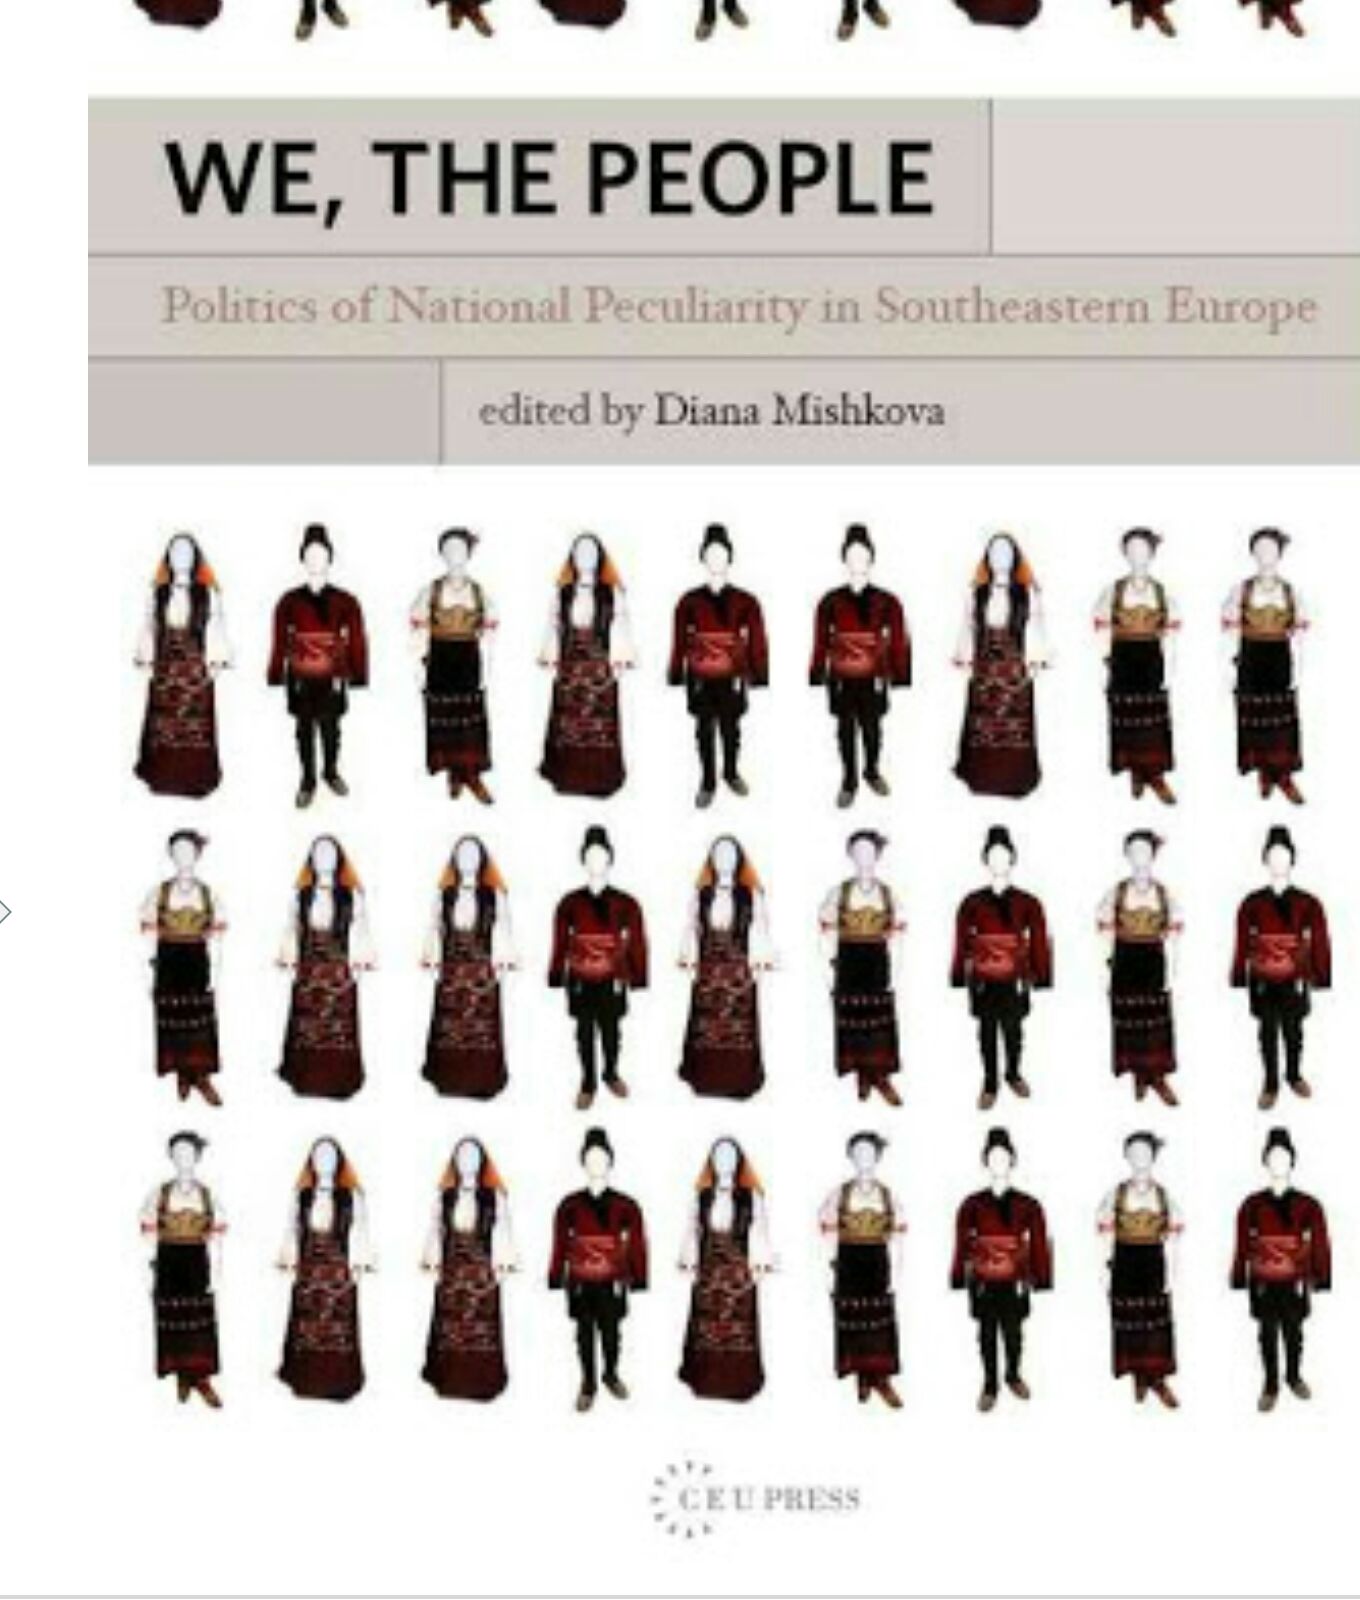 WE, THE PEOPLE POLITICS OF NATIONAL PECULIARITY IN SOUTHEASTERN EUROPE EDITED BY DIANA MISHKOVA KİTAP İNCELEMESİ